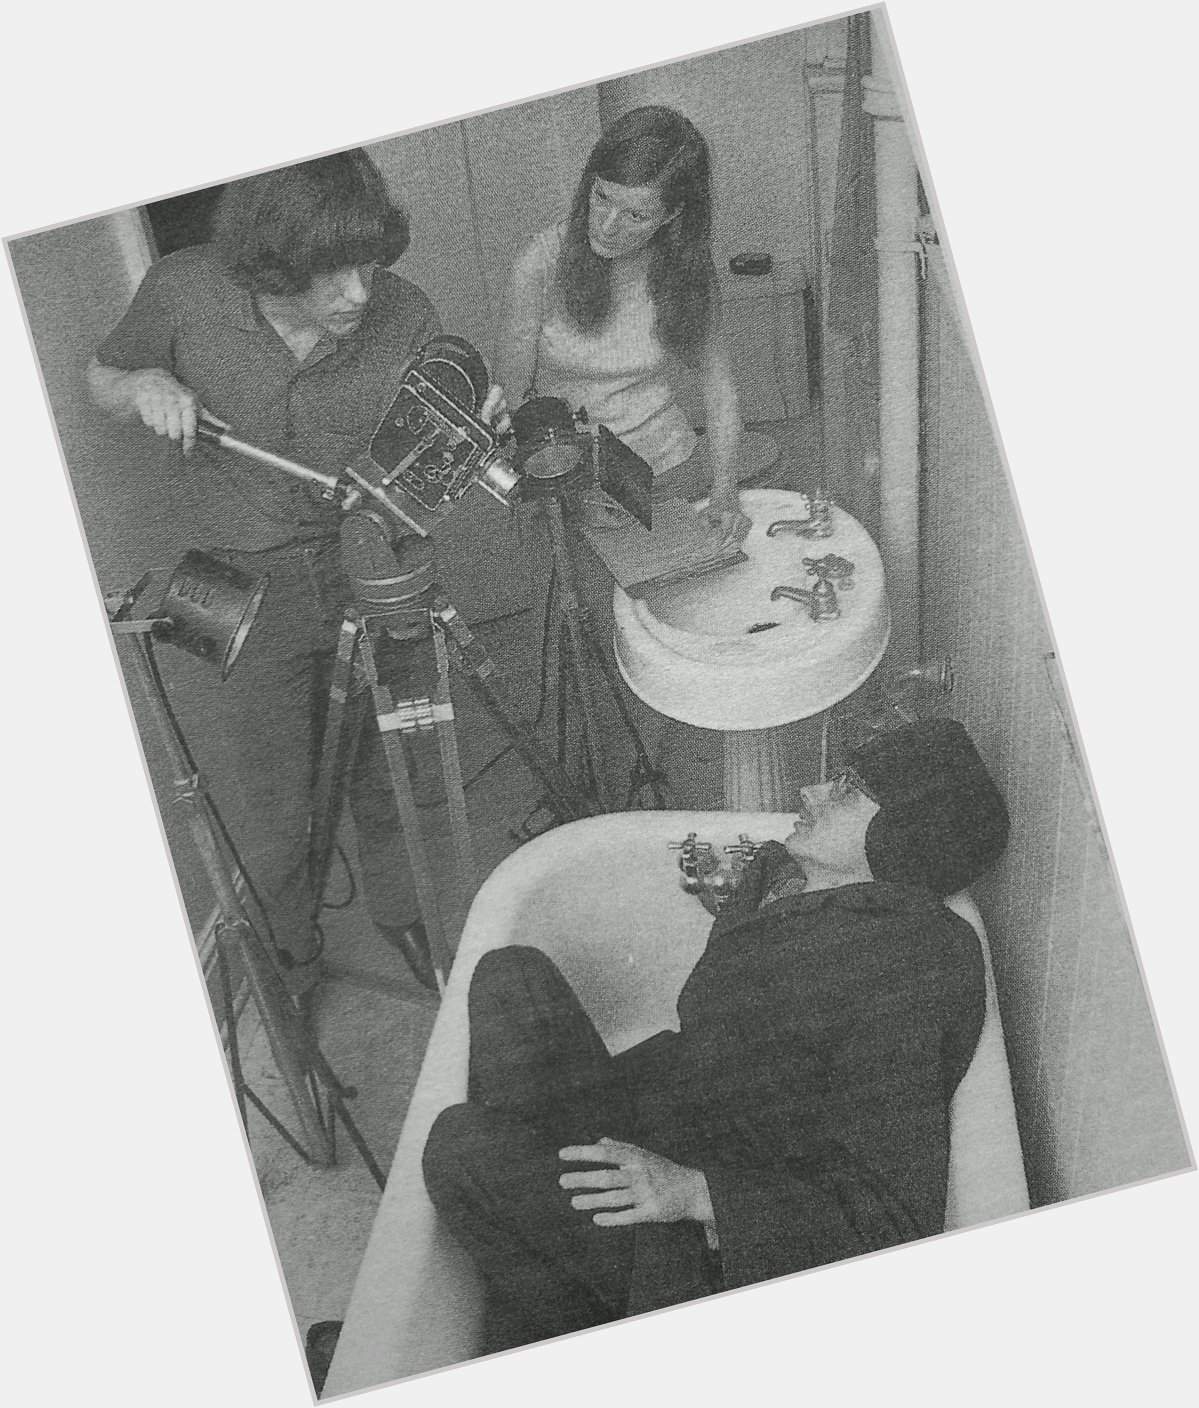 Happy Birthday DAVID CRONENBERG! Seen here directing his first short film in 1967, FROM THE DRAIN. 